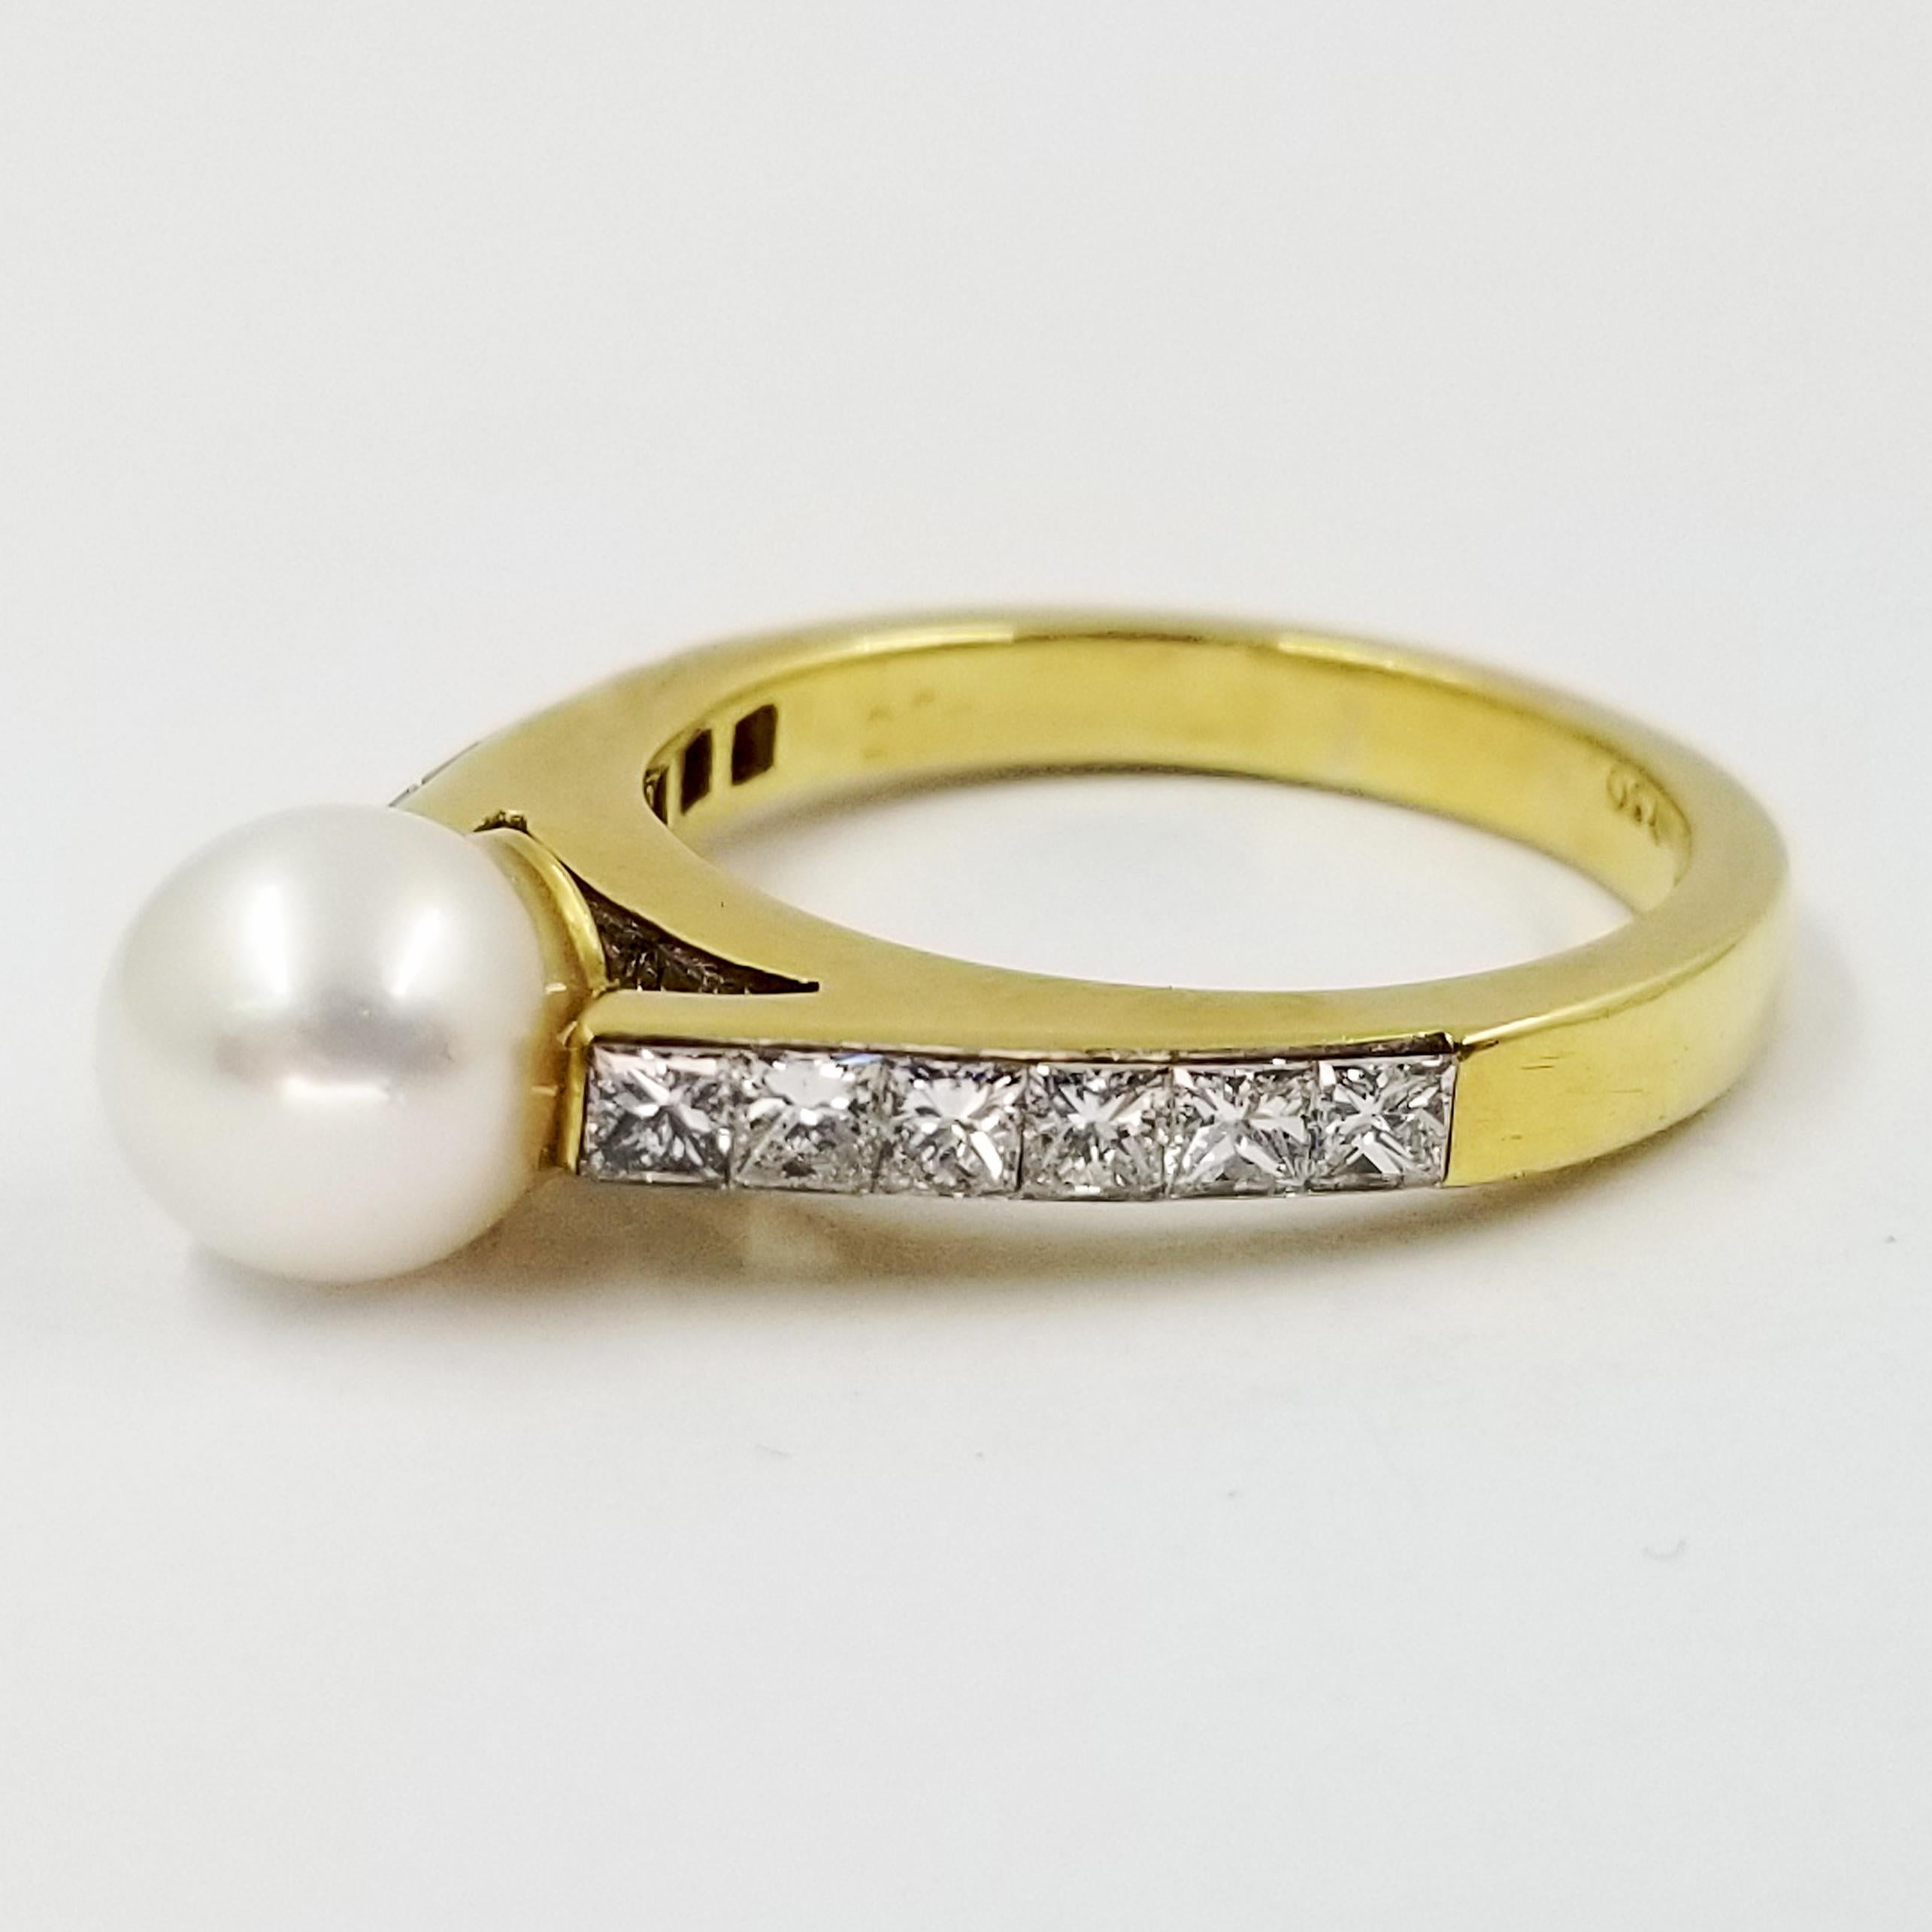 18 Karat Yellow Gold Ring From Designer Quadrillion. The Ring Features a 7mm Round White Pearl Floating Above the Cathedral Mounting. The Mounting Contains 15 Princess Cut Diamonds Totaling Approximately 1.5 Carats of VVS Clarity & F Color. Finger